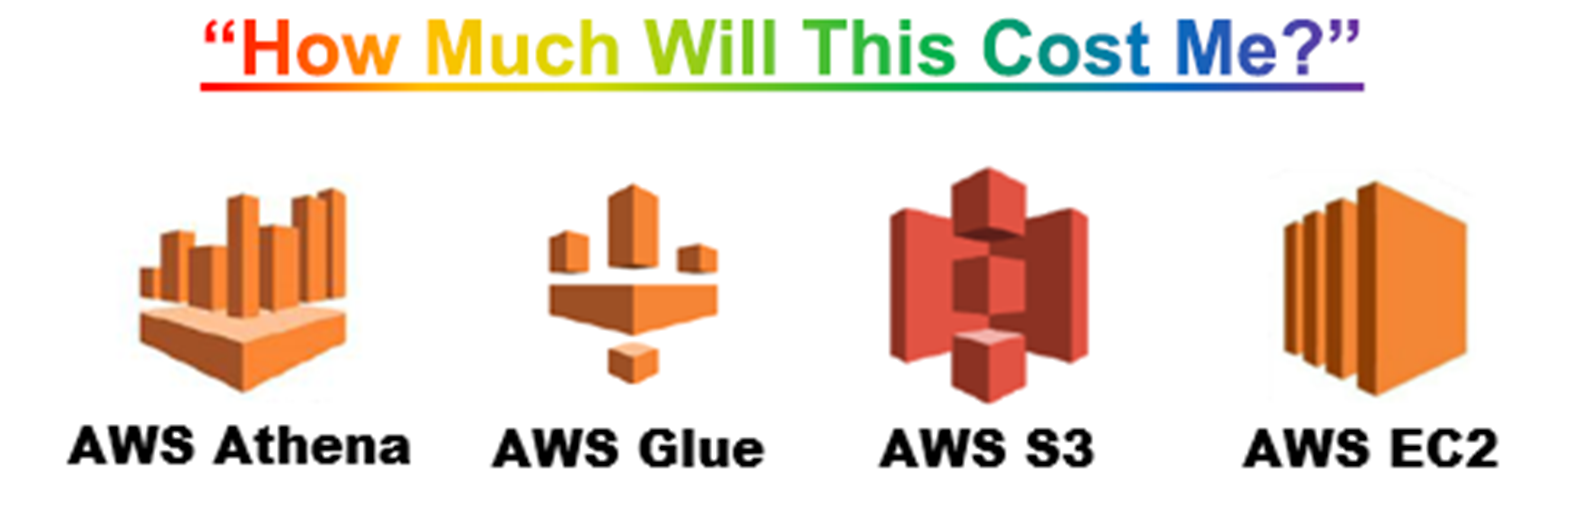 Highlights the four AWS Services used today (AWS Athena, AWS Glue, AWS S3, AWS EC2) and a colorful title that asks "How Much Will This Cost Me?"